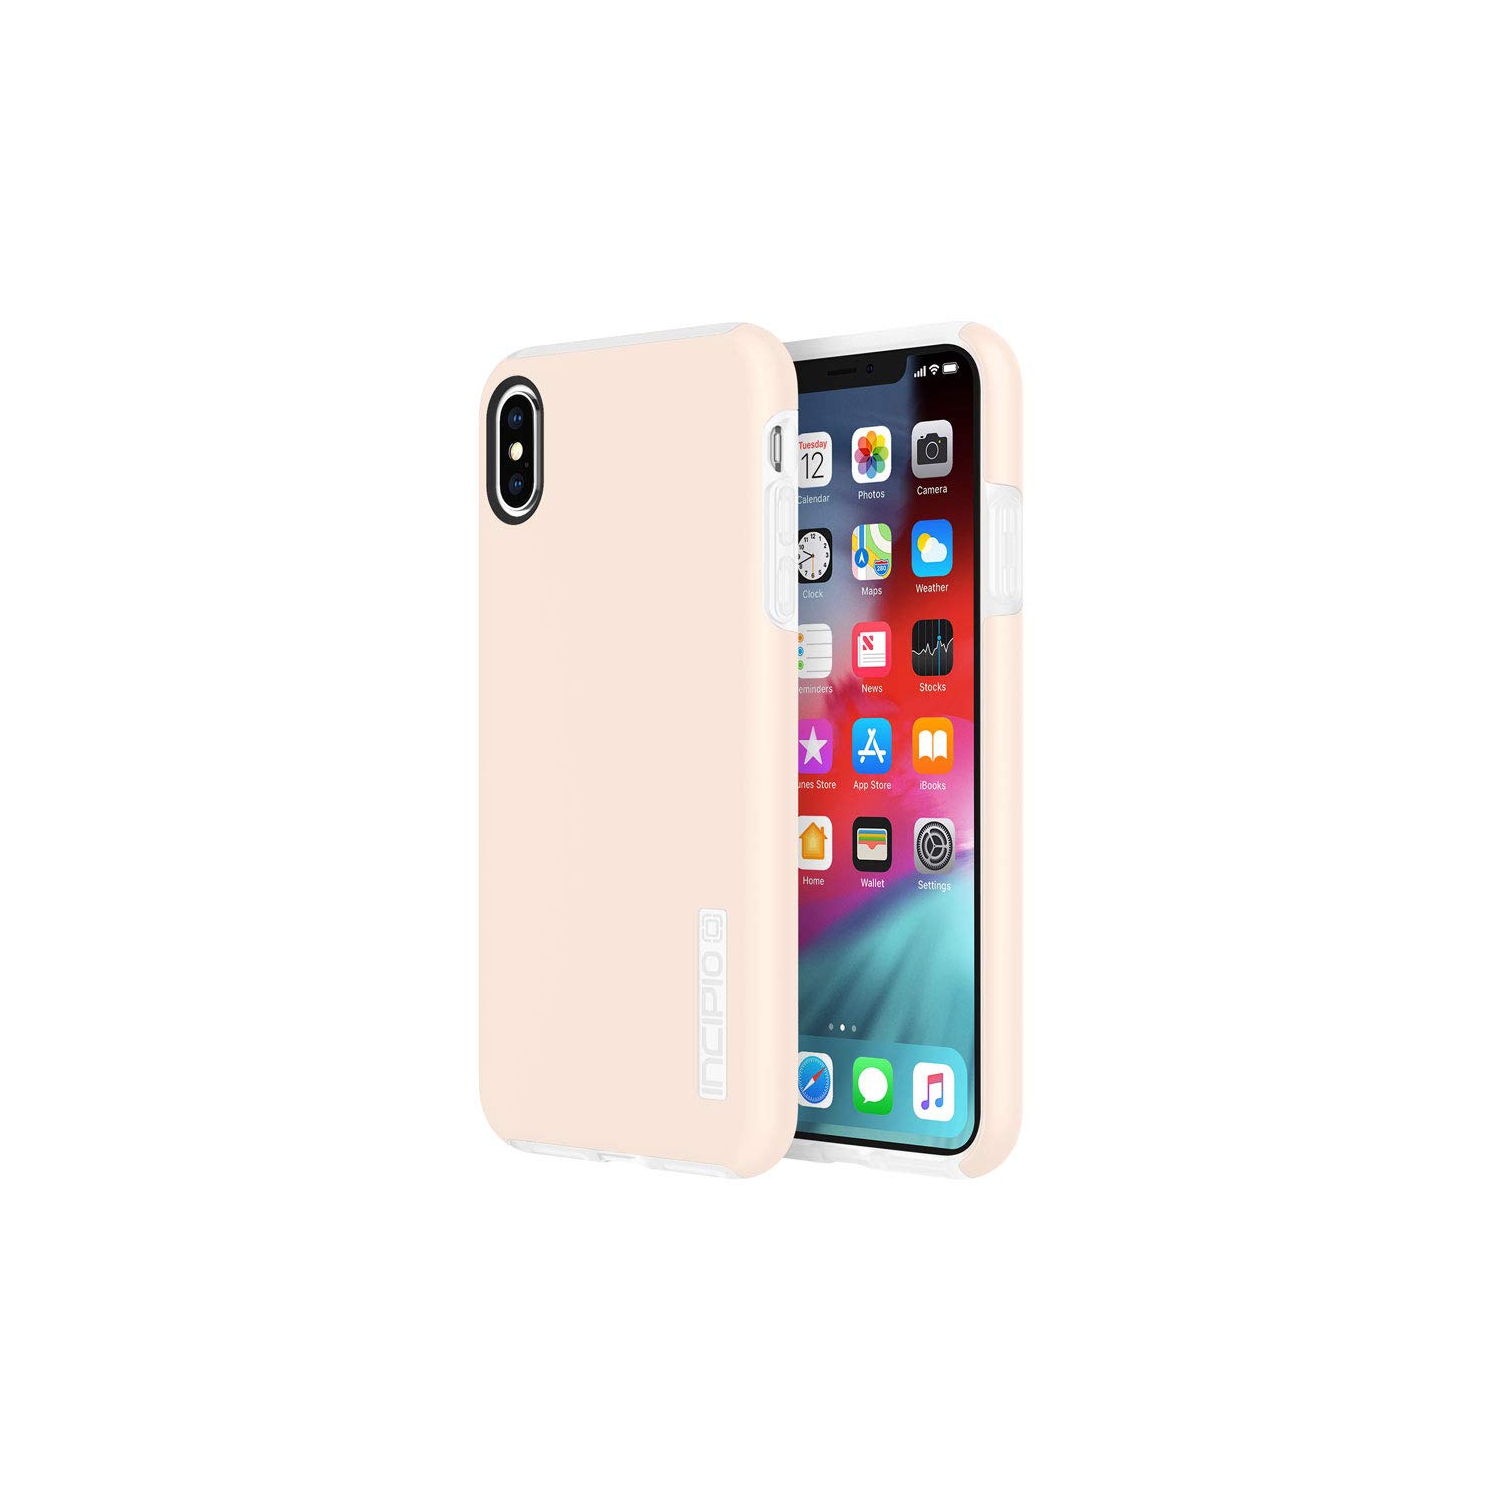 Incipio DualPro Case for iPhone Xs Max (6.5) Case with Shock Absorbing Inner Core & Protective Outer Shell - Rose Blush